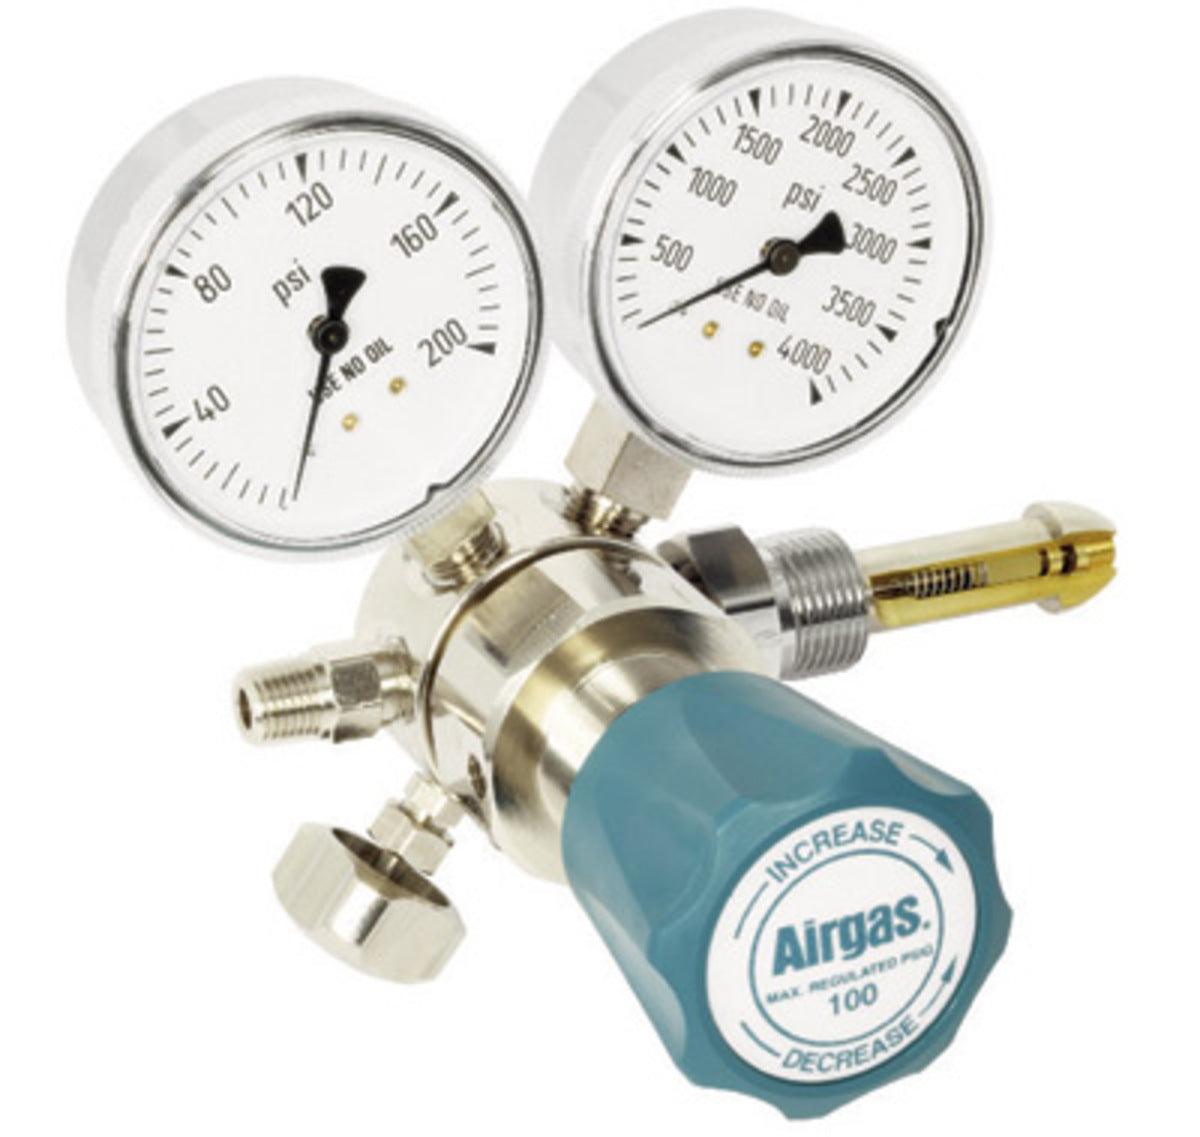 Airgas Two Stage Brass 0-25 psi Analytical Cylinder Regulator With Needle Outlet